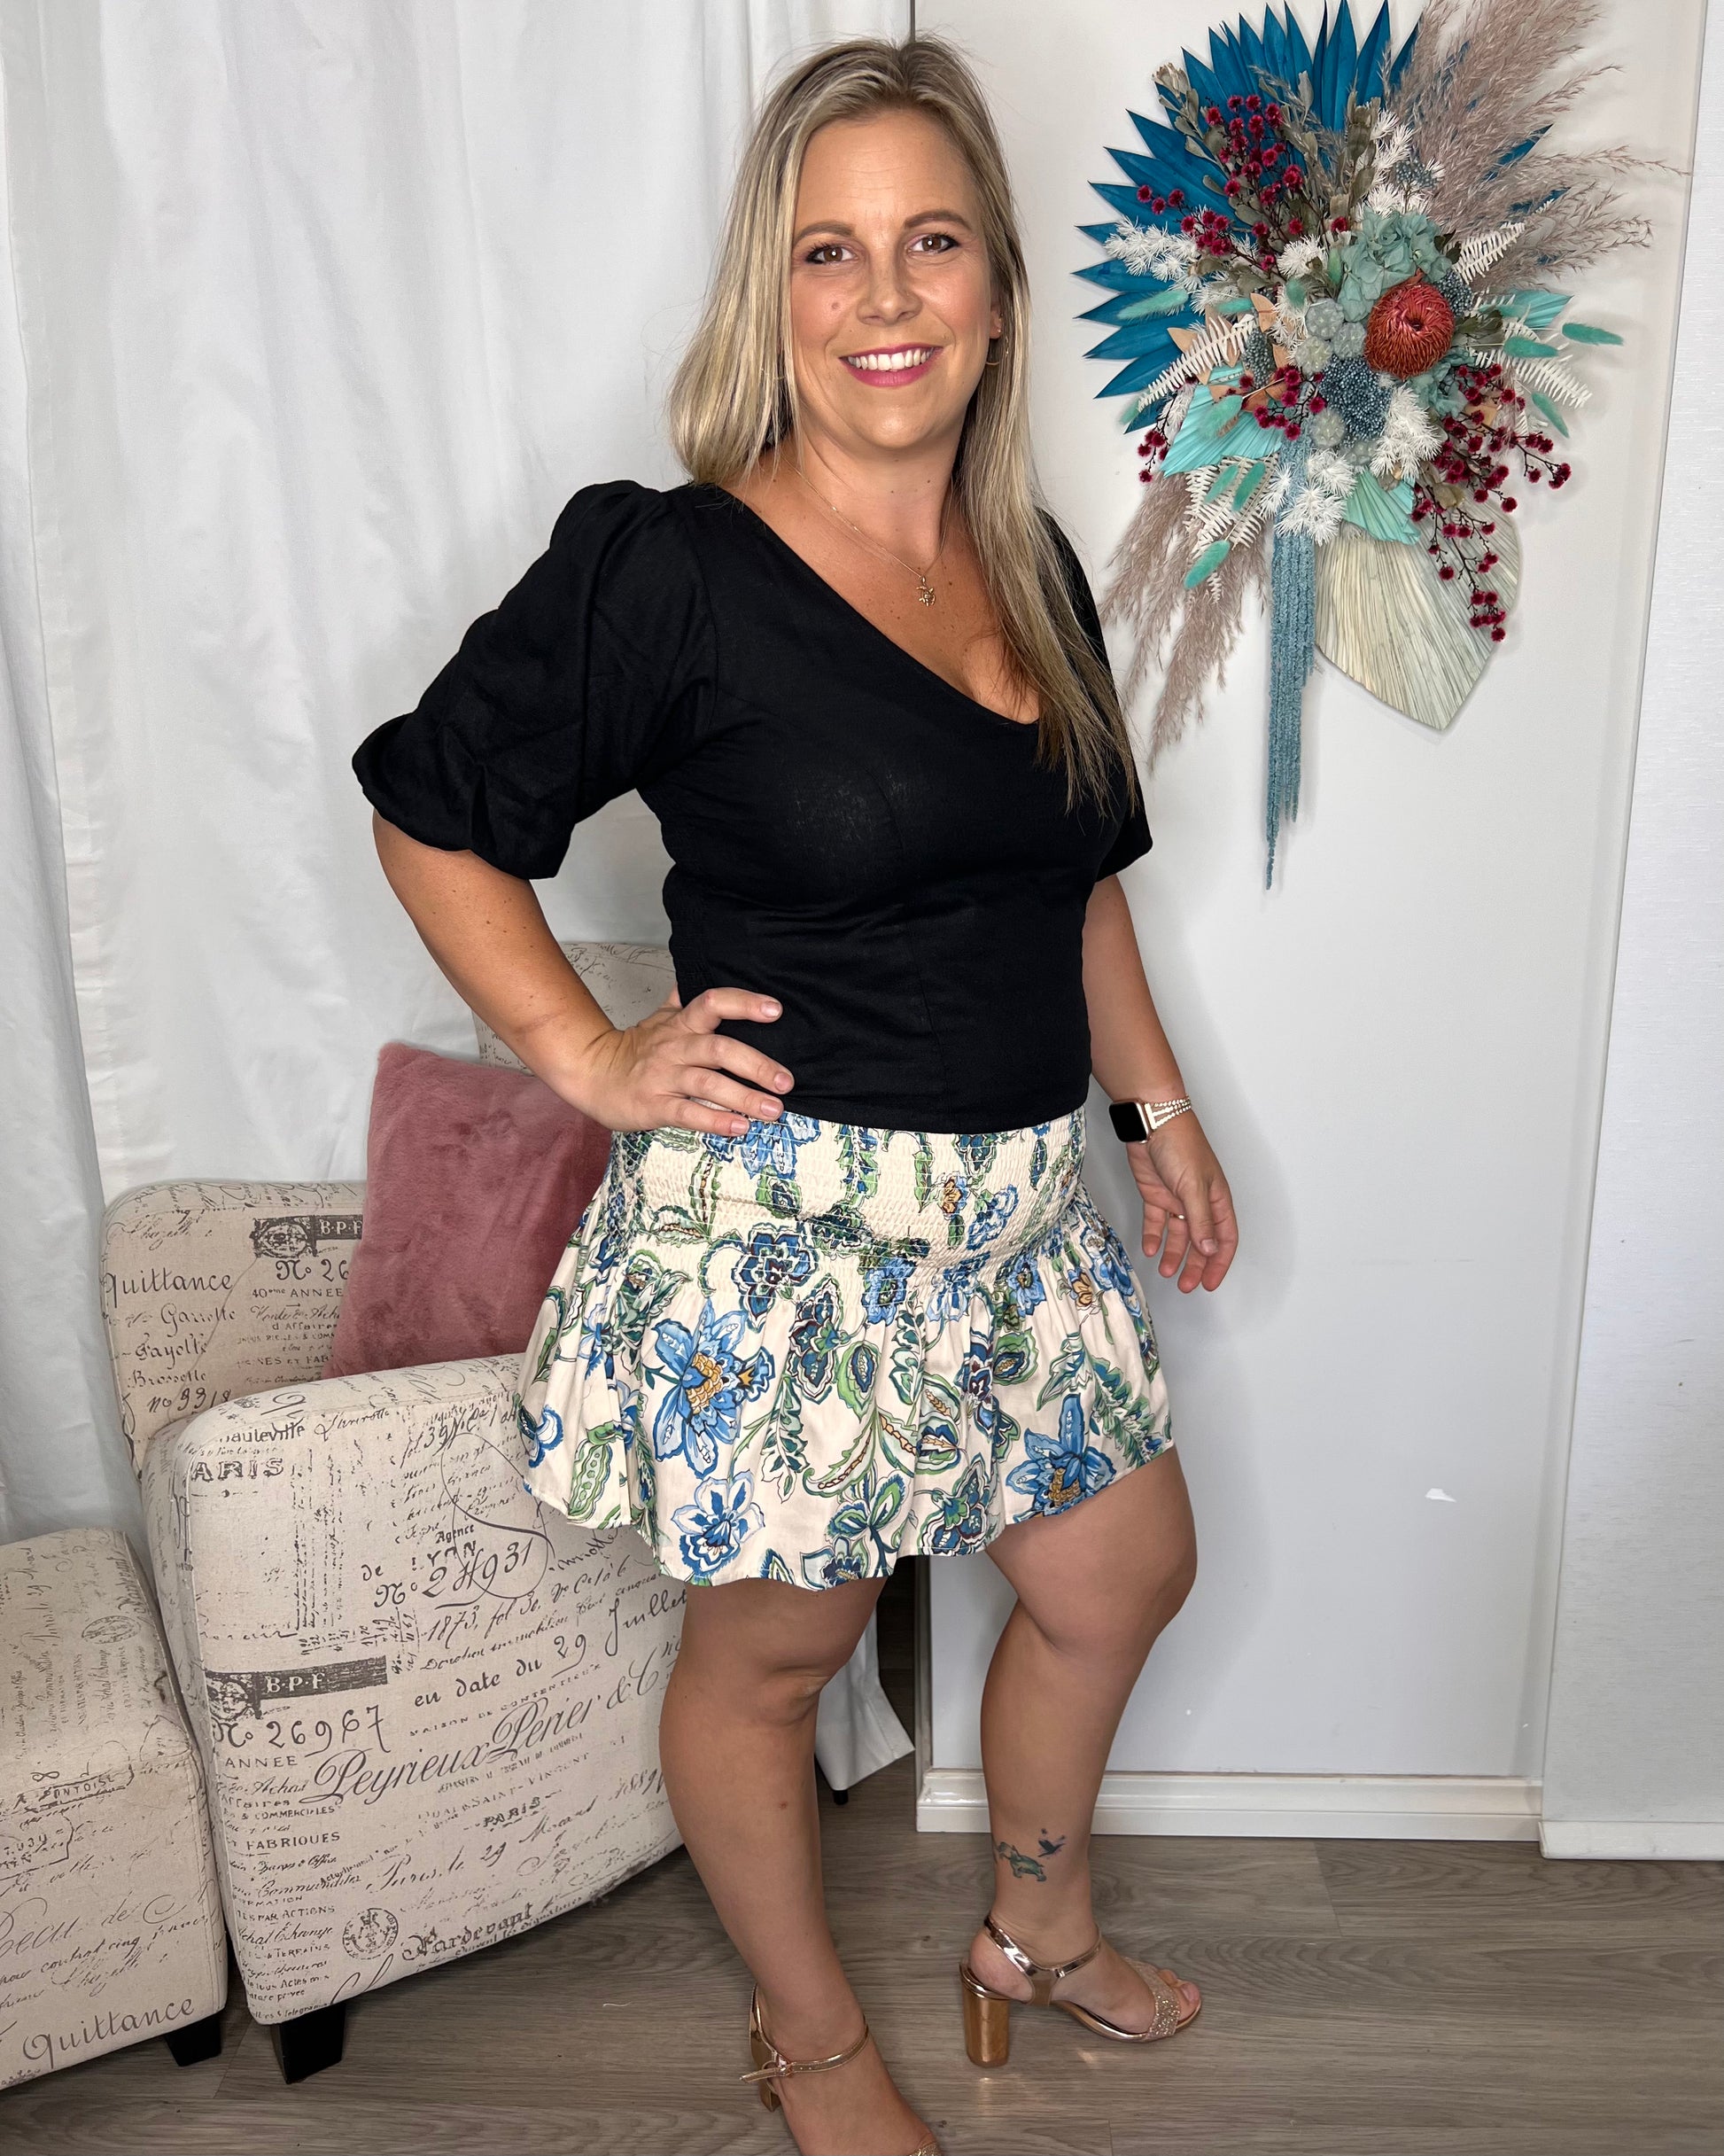 
100% cotton
Lot’s of stretch
Bump friendly
True to size

SKU: 16732SWSS
Size range: 6-22
Label: Sass Clothing - Zoey Shirred Mini Skirt - Sass Clothing